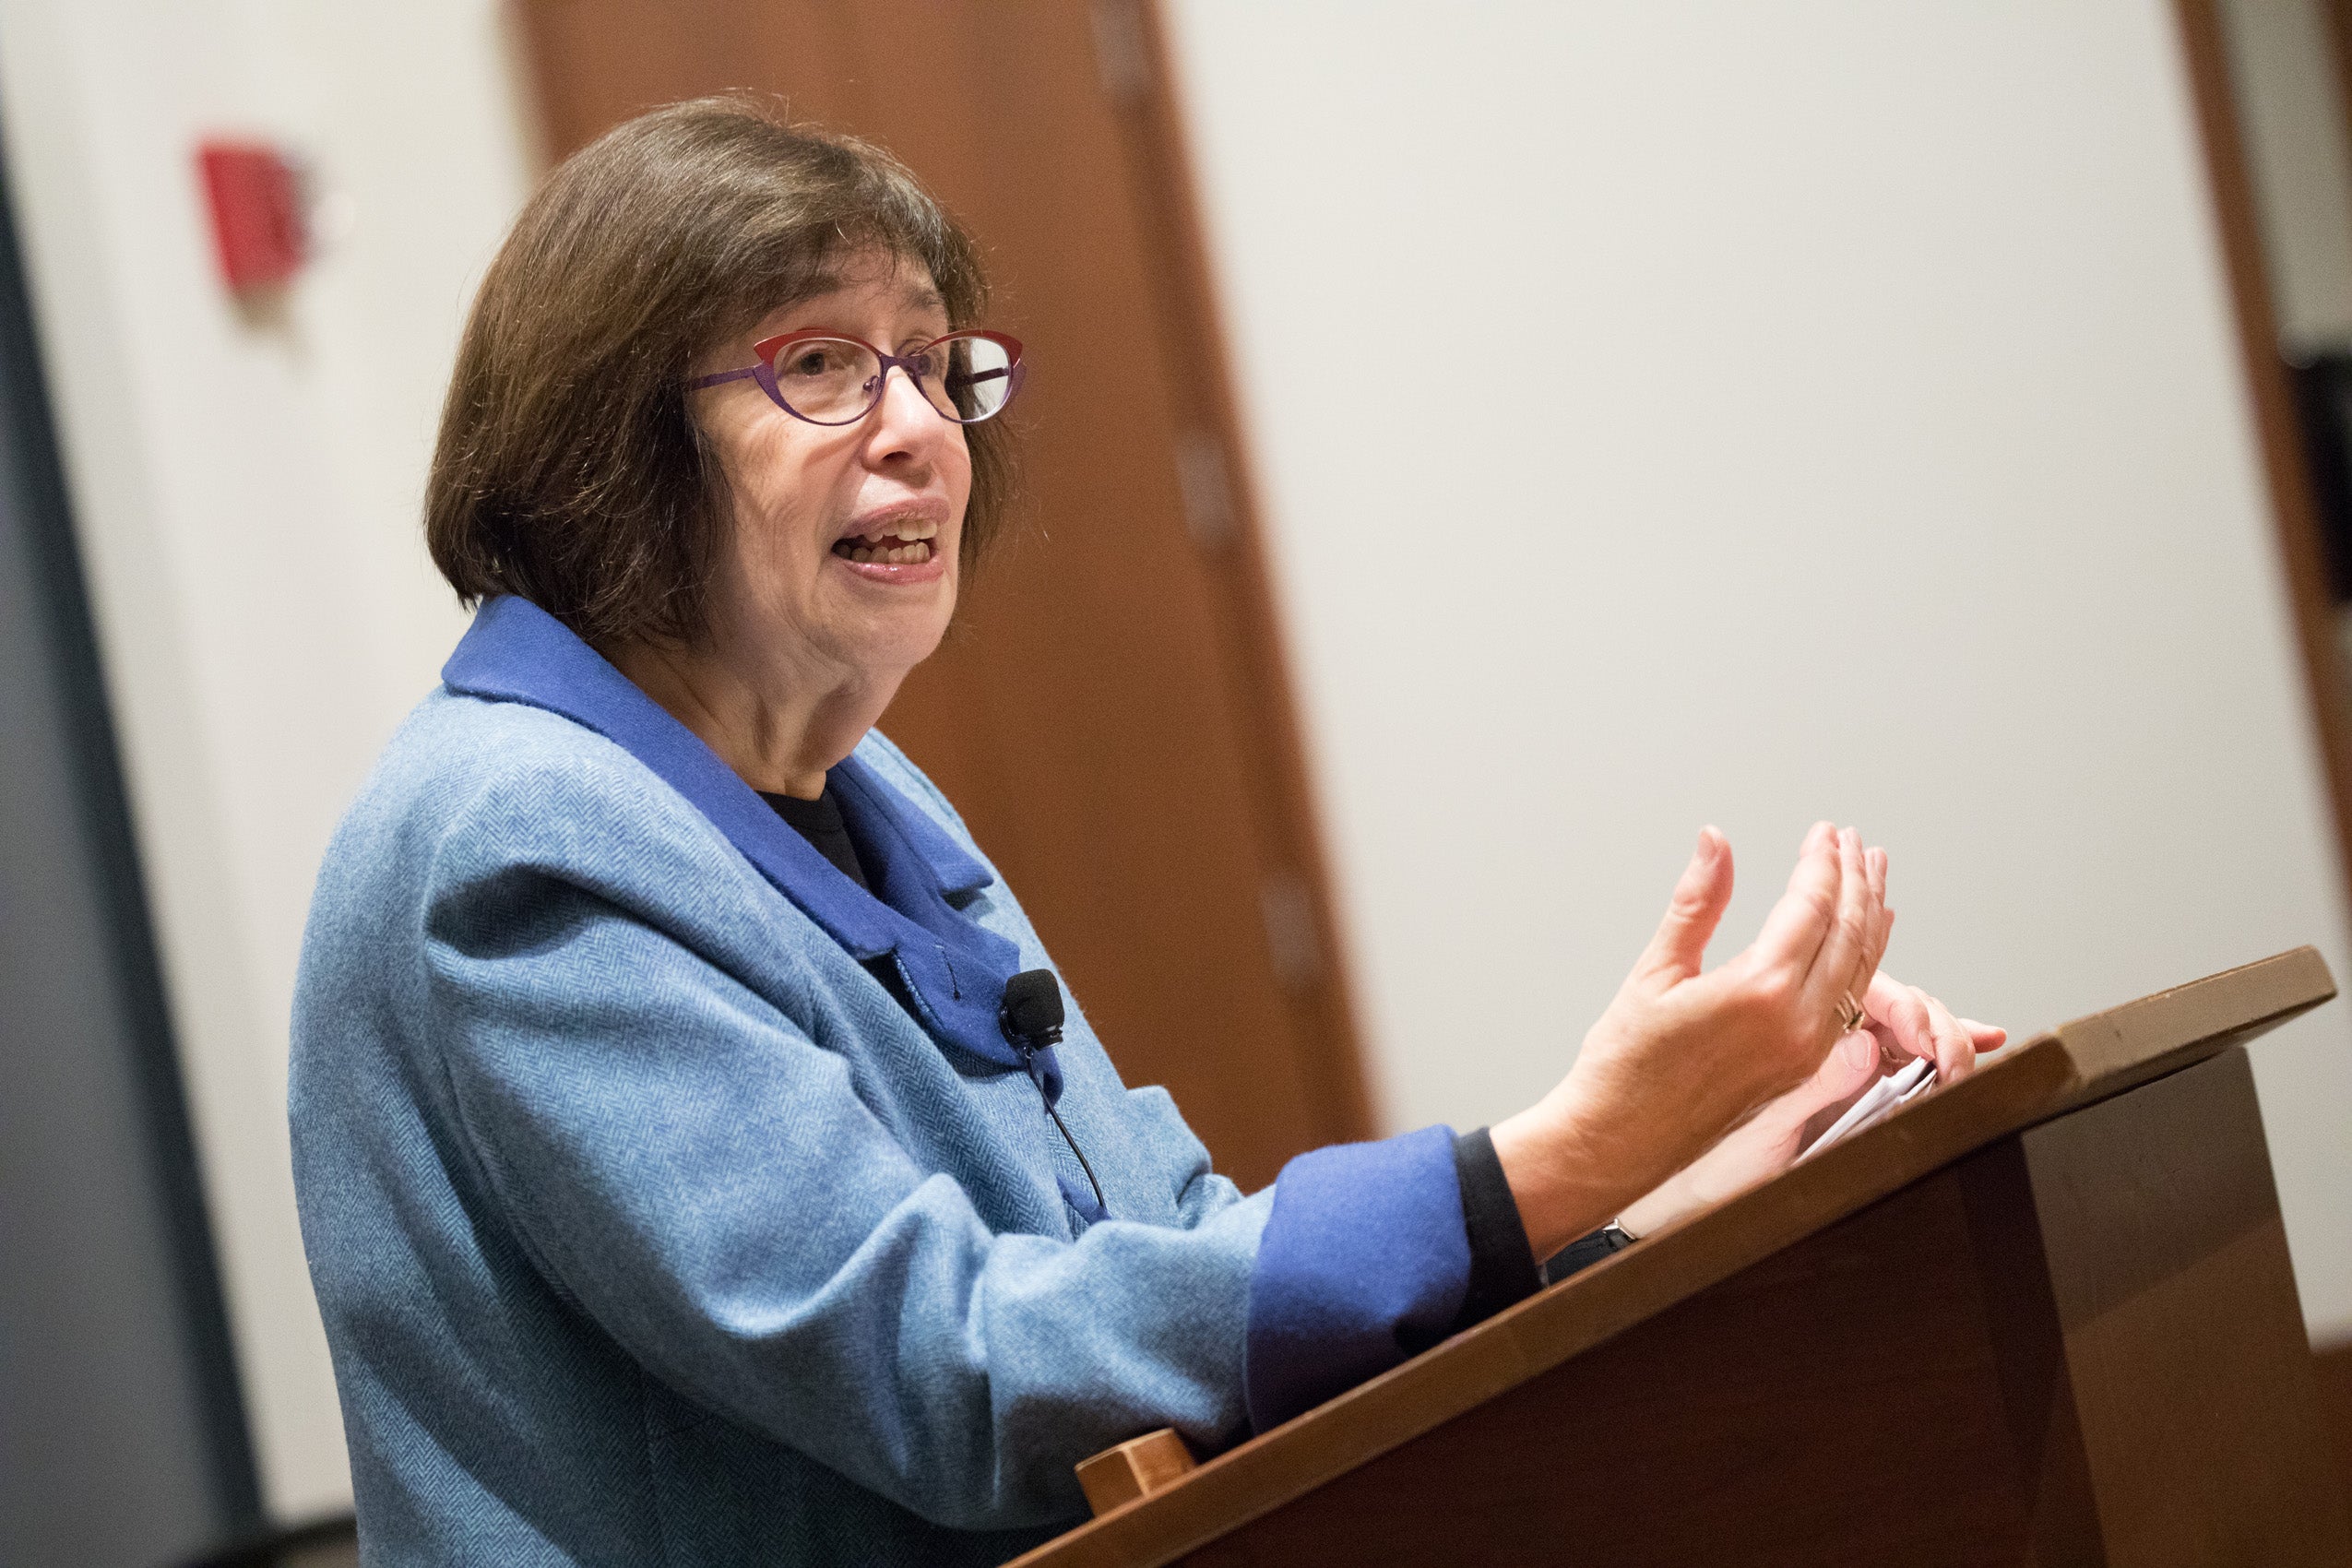 In ethics lecture, Linda Greenhouse discusses the Supreme Court's role in threatening civil society 3